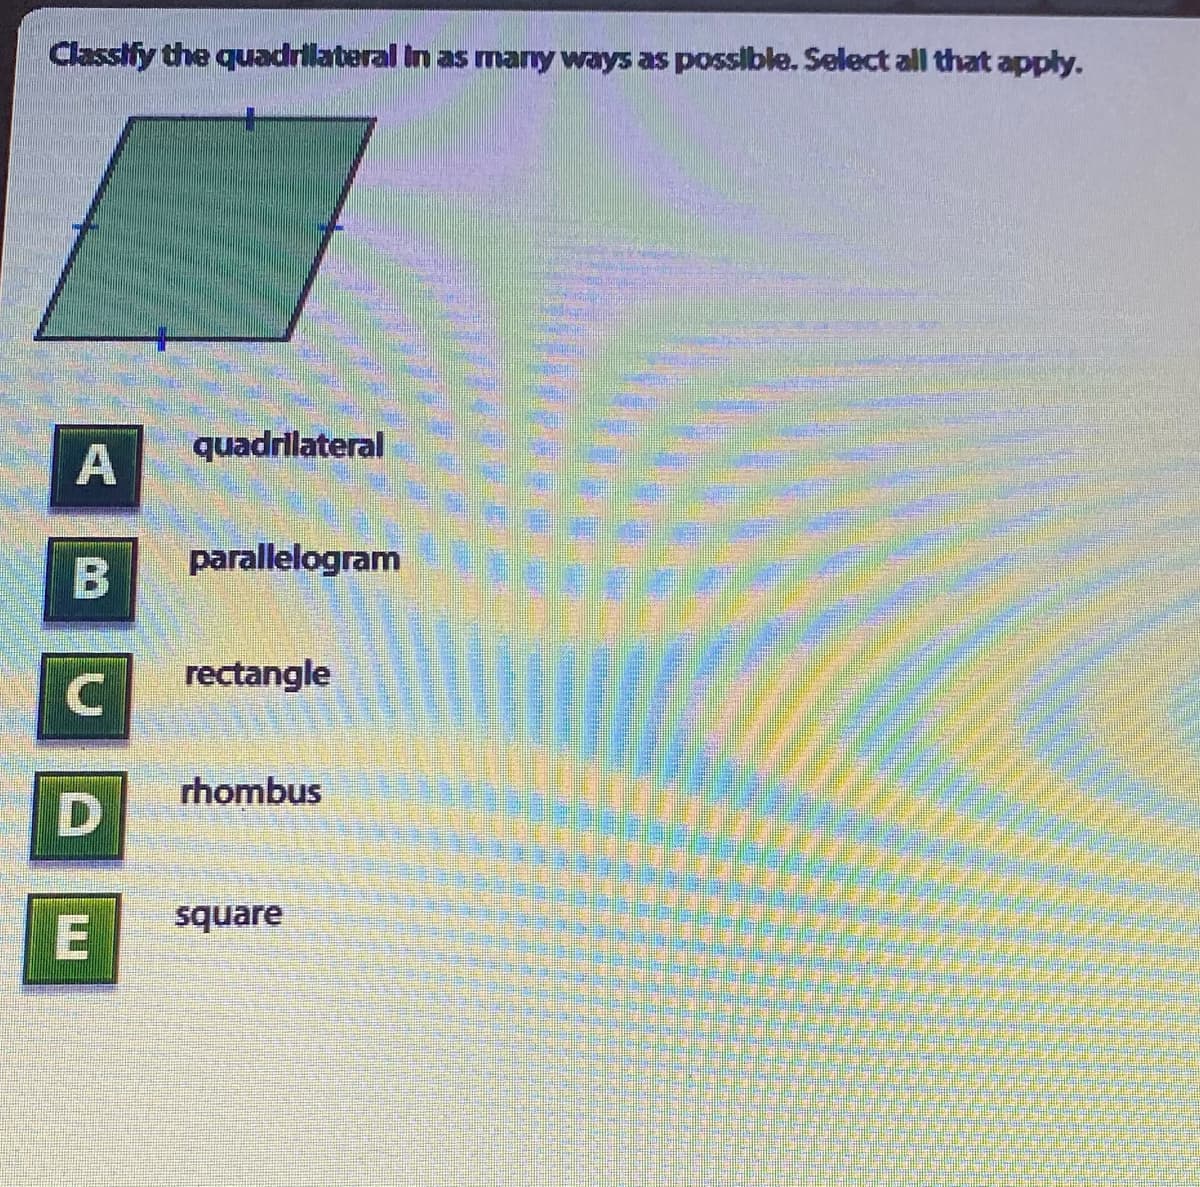 Classify the quadrilateral in as many ways as posslble. Select all that apply.
quadrilateral
parallelogram
rectangle
rhombus
square
